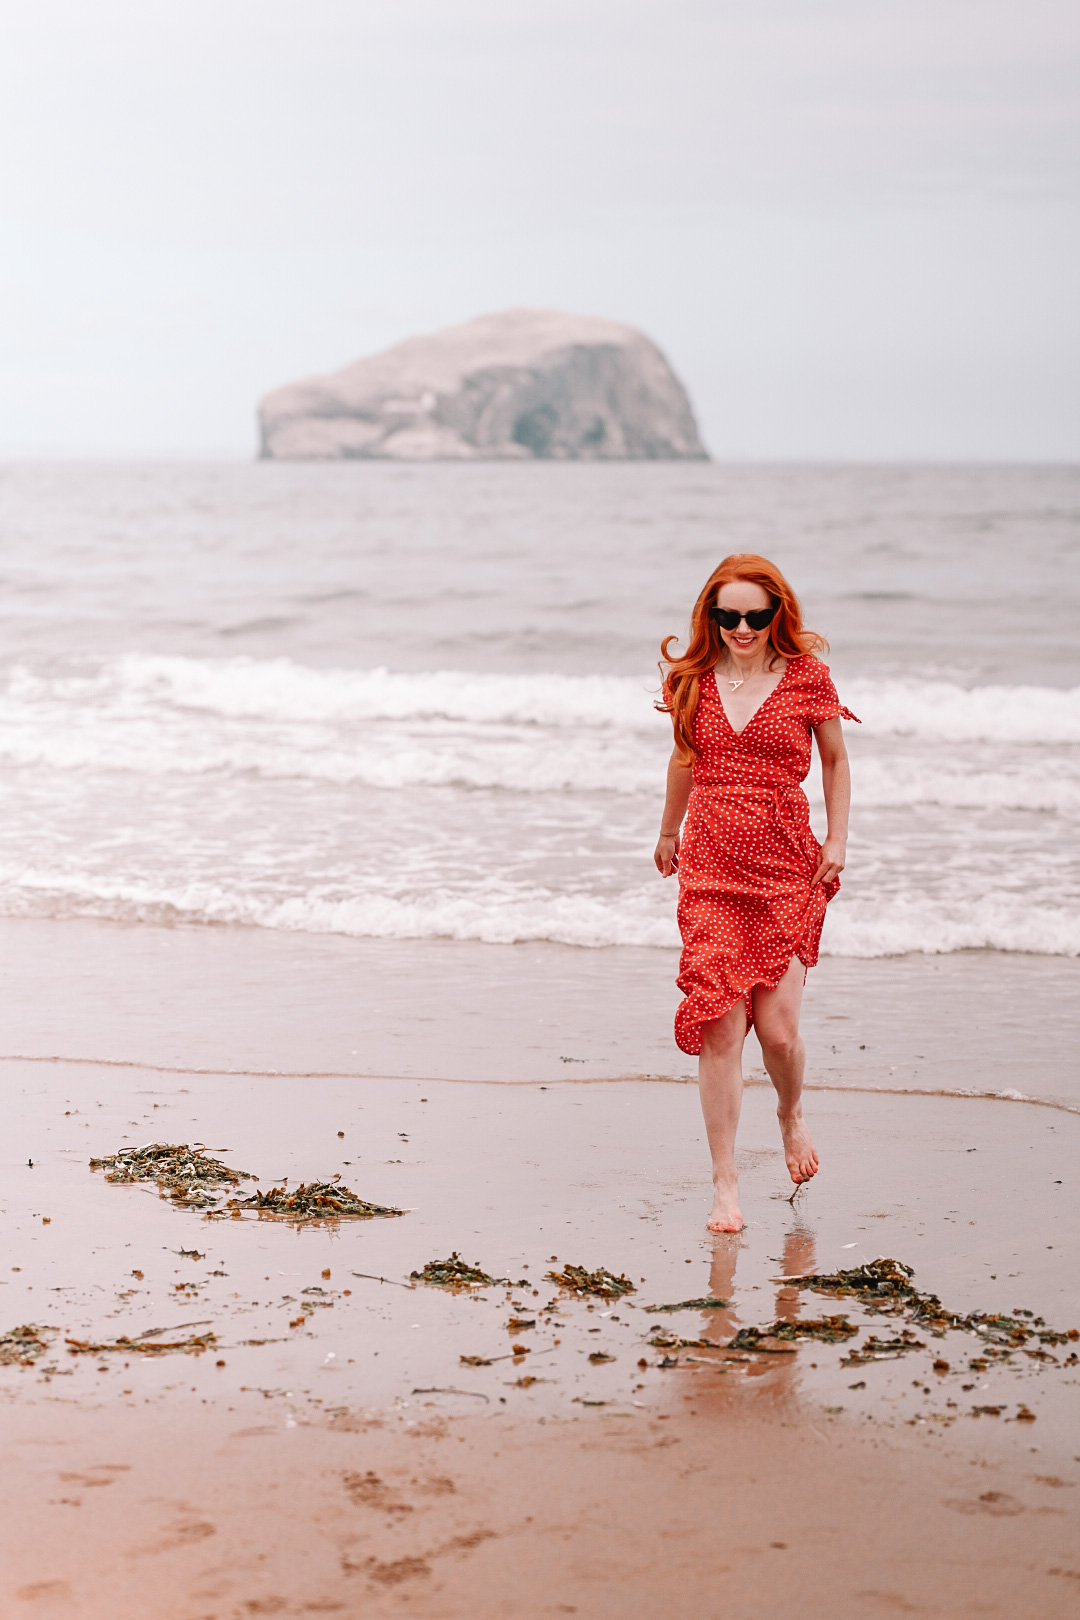 Amber in a red dress on the beach